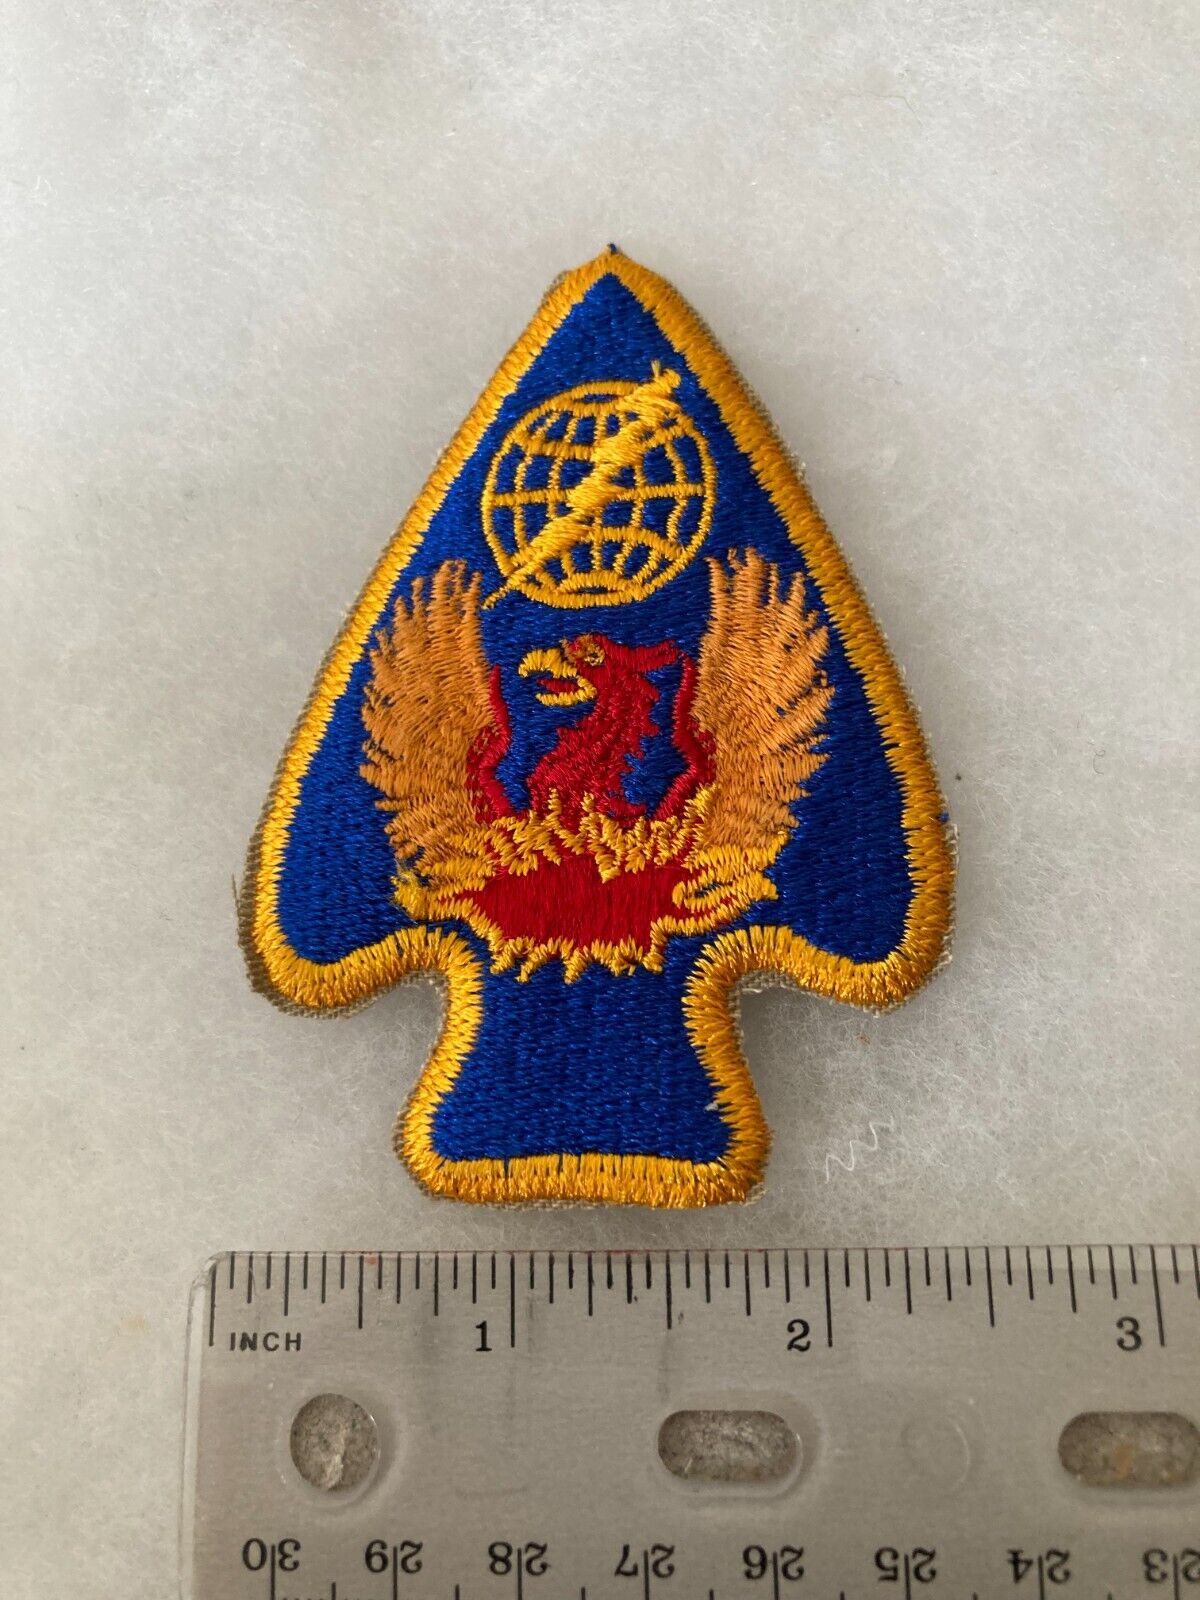 Authentic US Army Project Phoenix NSA Shoulder Sleeve Insignia SSI Patch 3G